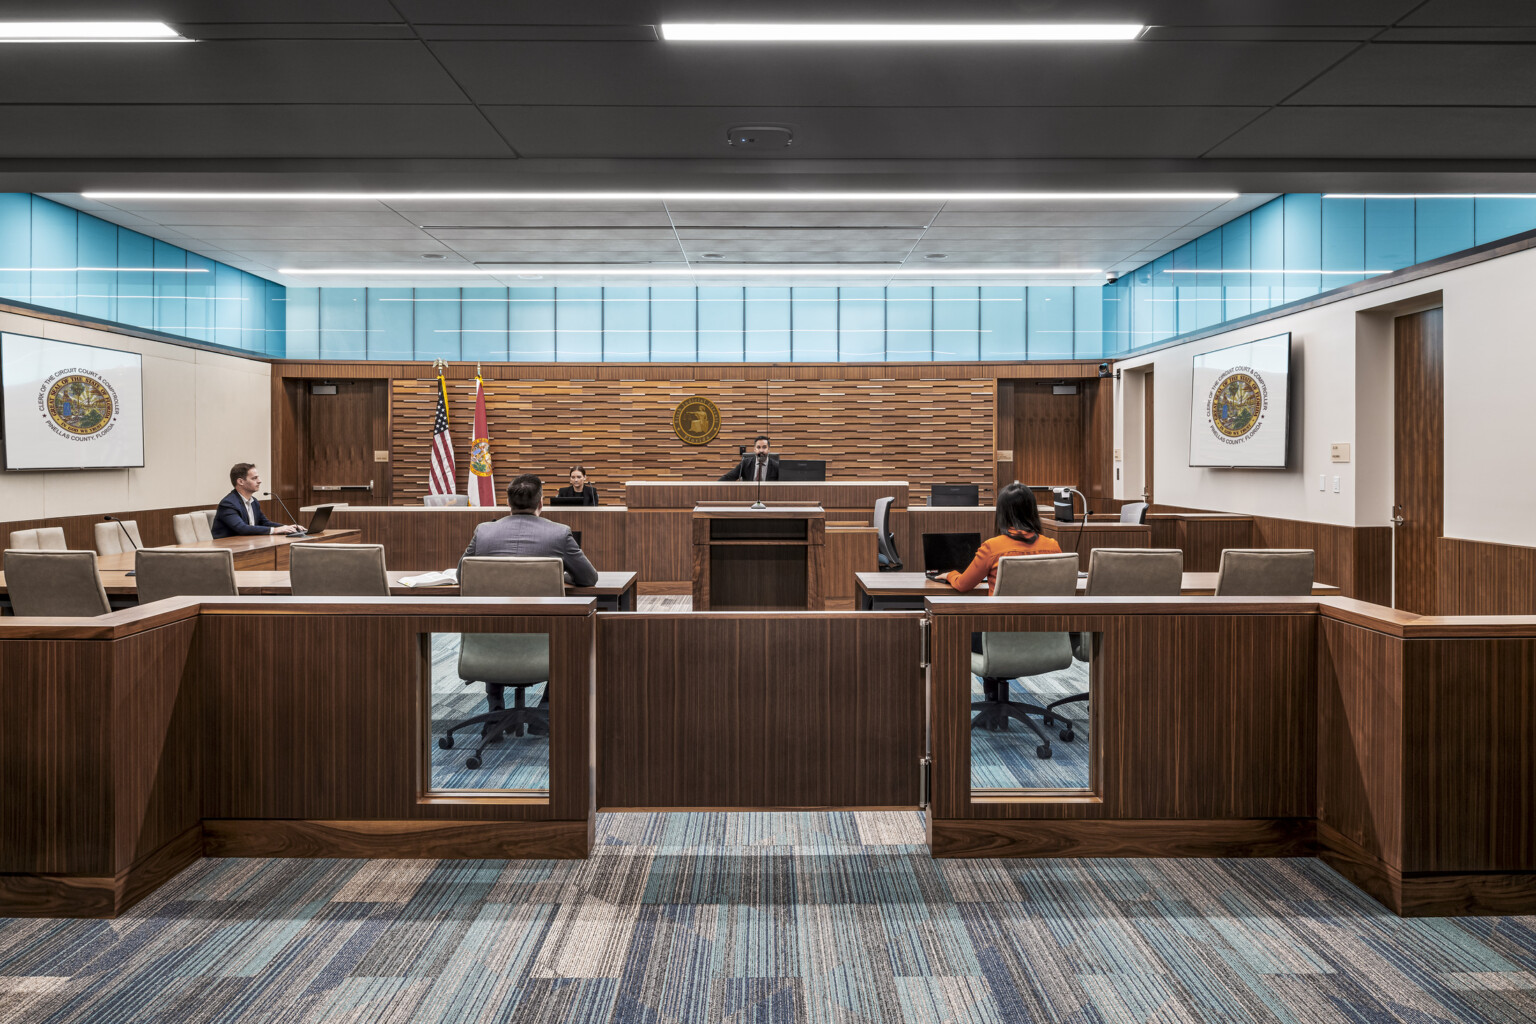 four people seated in family courtroom, turquoise-tinted clerestory windows run across three walls below the ceiling providing natural light, darker wood panels on back wall, podium, desks, dividers and gates, geometric patterned low-pile carpet in soothing cool hues